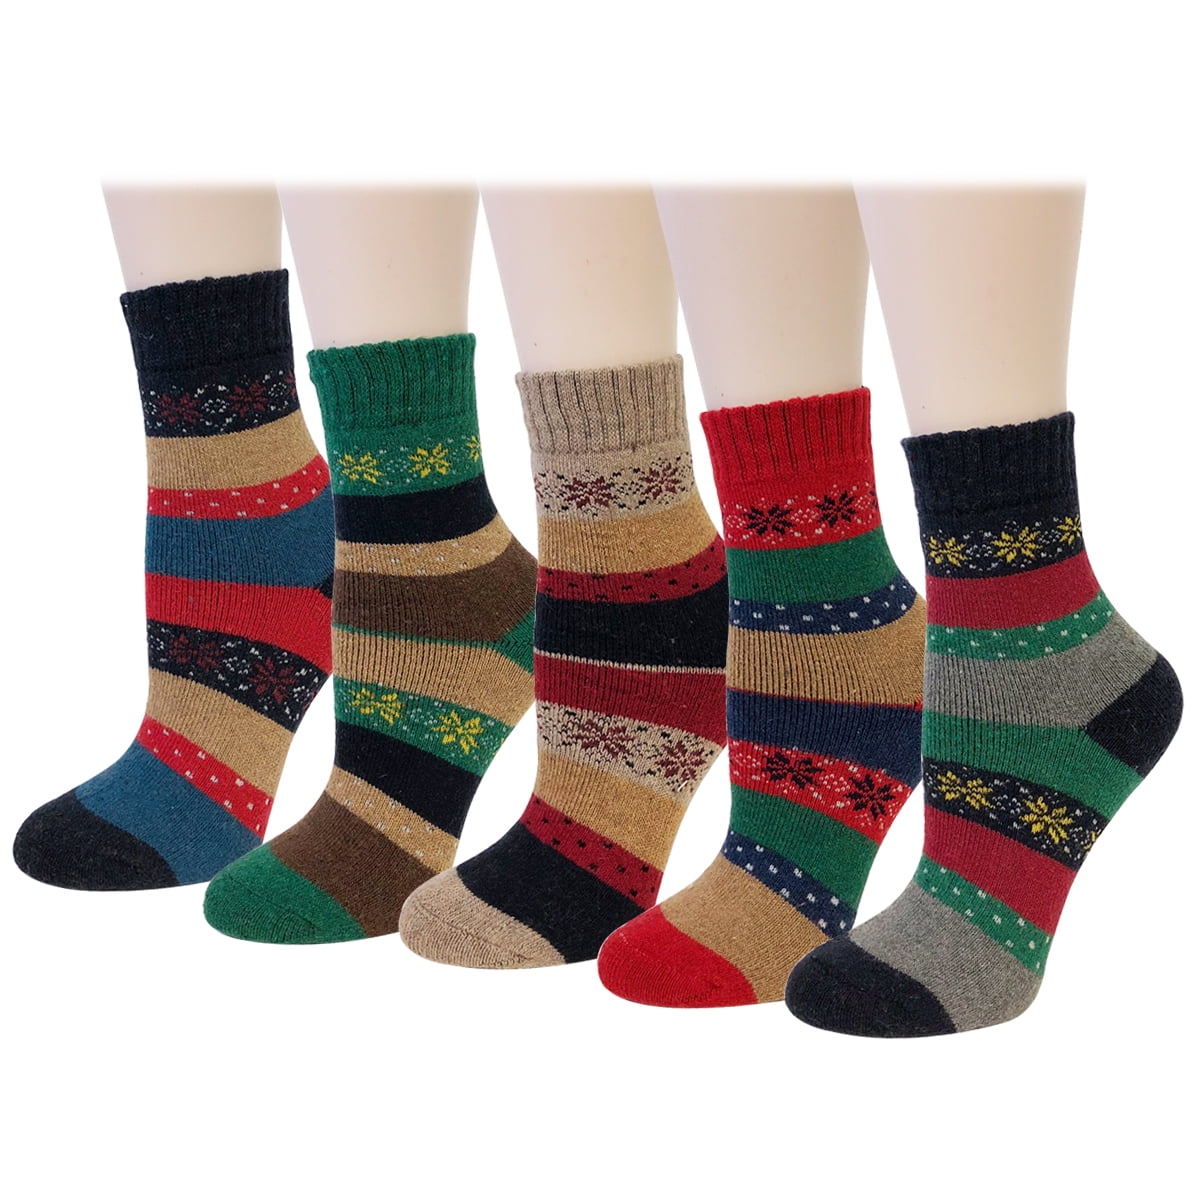 Wrapables® Women's Thick Winter Warm Wool Socks (Set of 5), Snowflakes ...